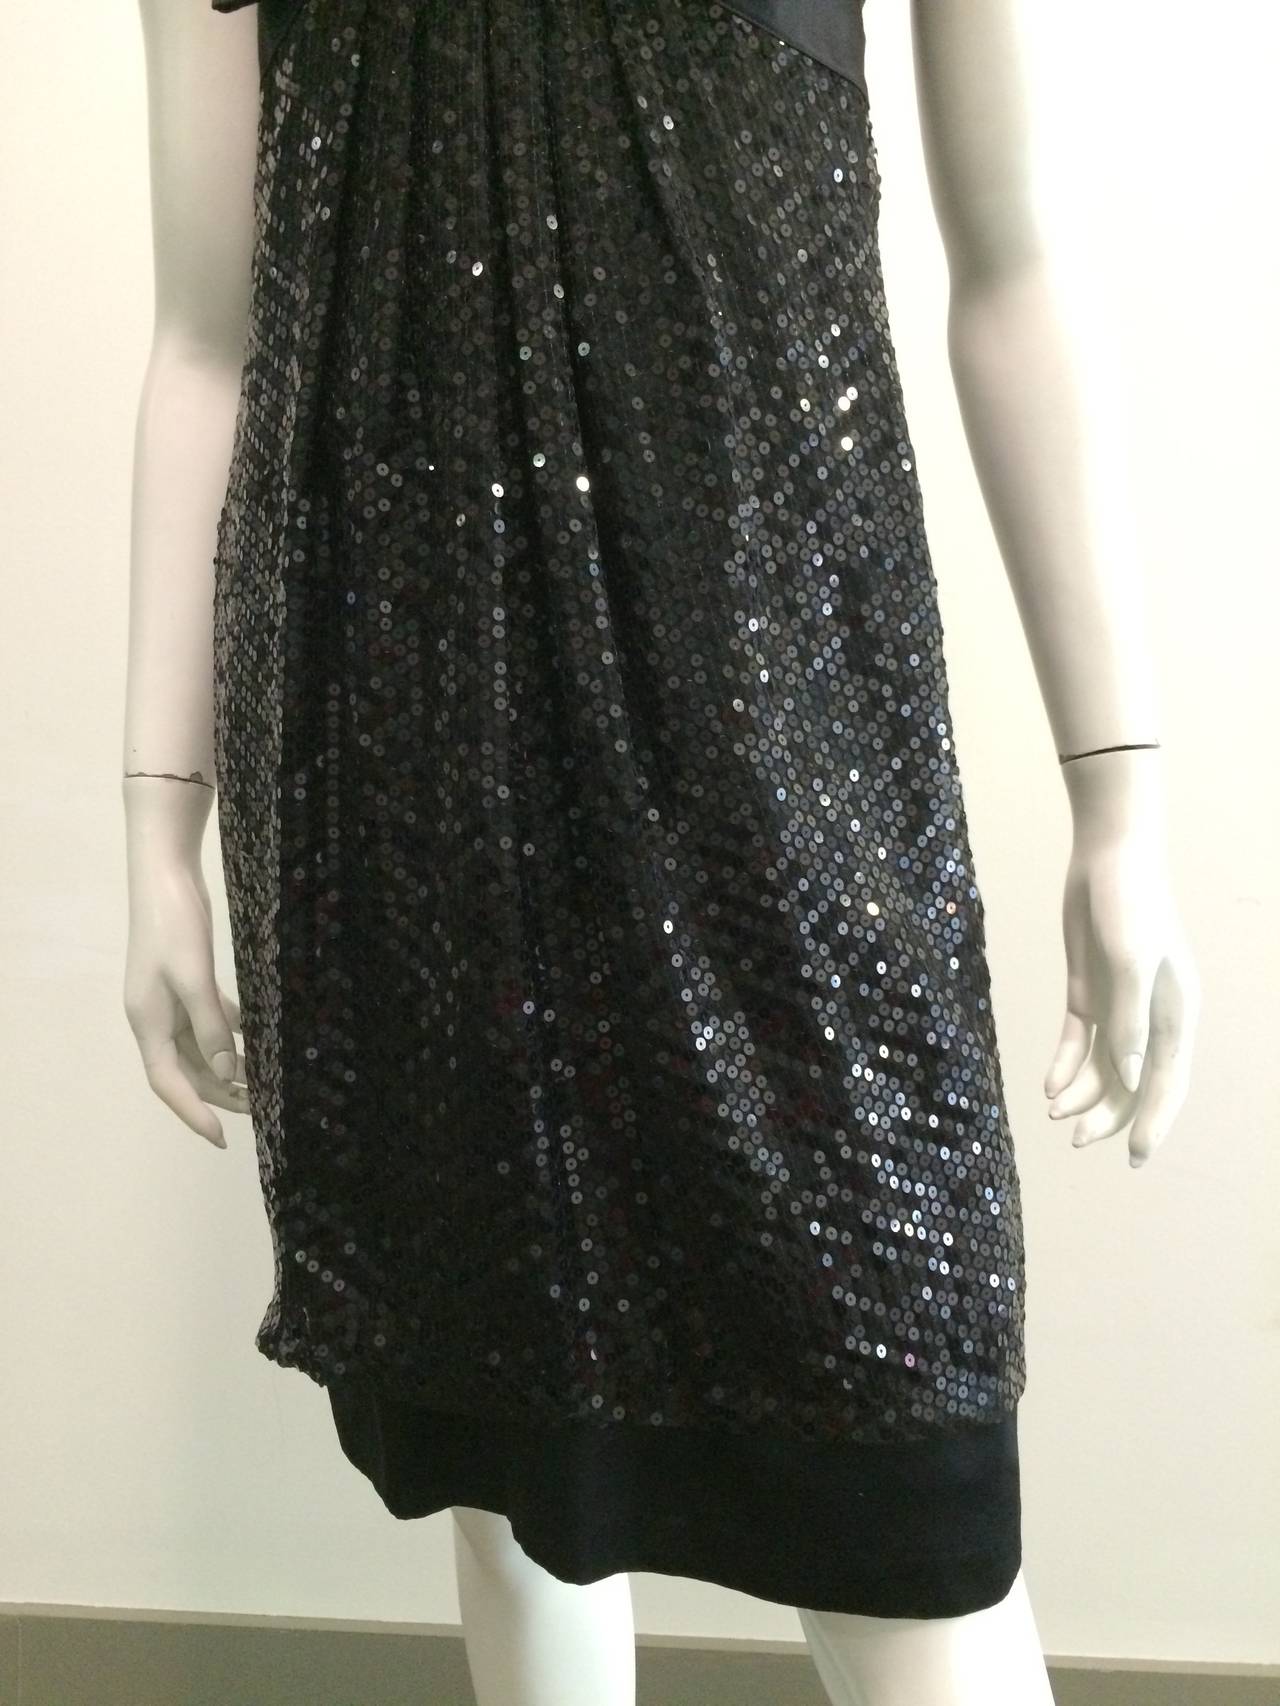  Louis Feraud 1980s Black Sequin Evening Cocktail Dress Size 6. In Excellent Condition For Sale In Atlanta, GA